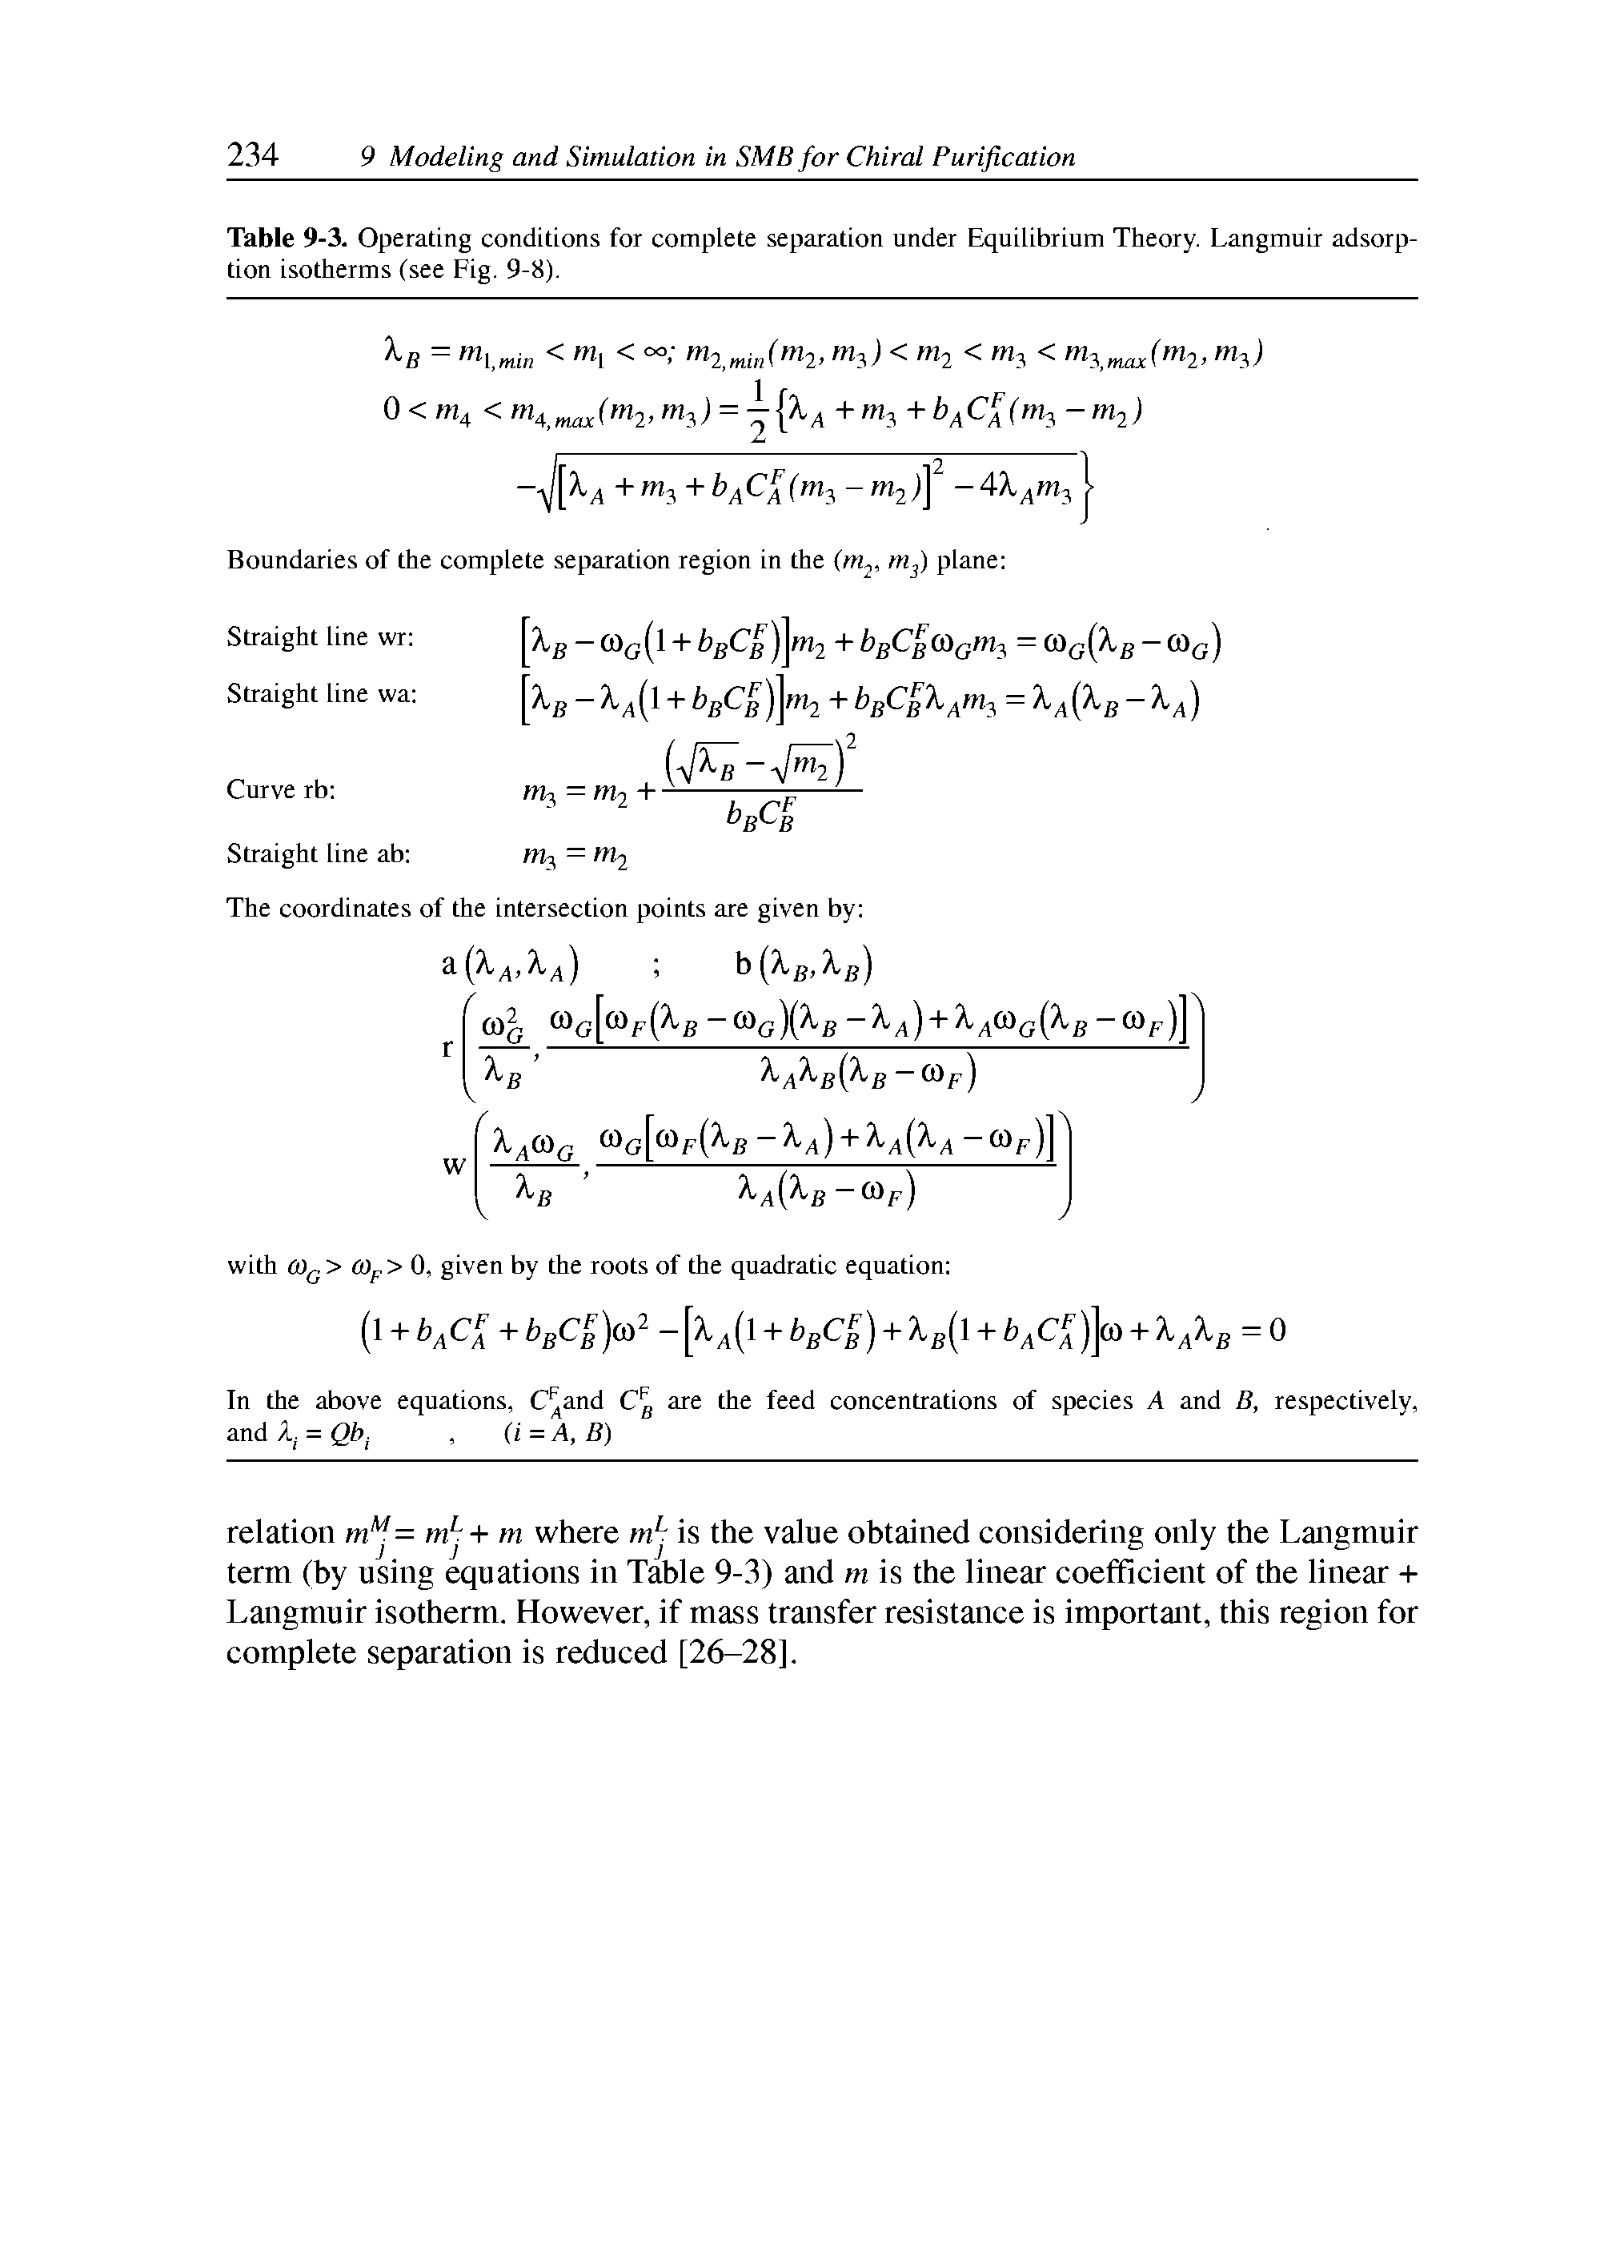 Table 9-3. Operating conditions for complete separation under Equilibrium Theory. Langmuir adsorption isotherms (see Fig. 9-8).